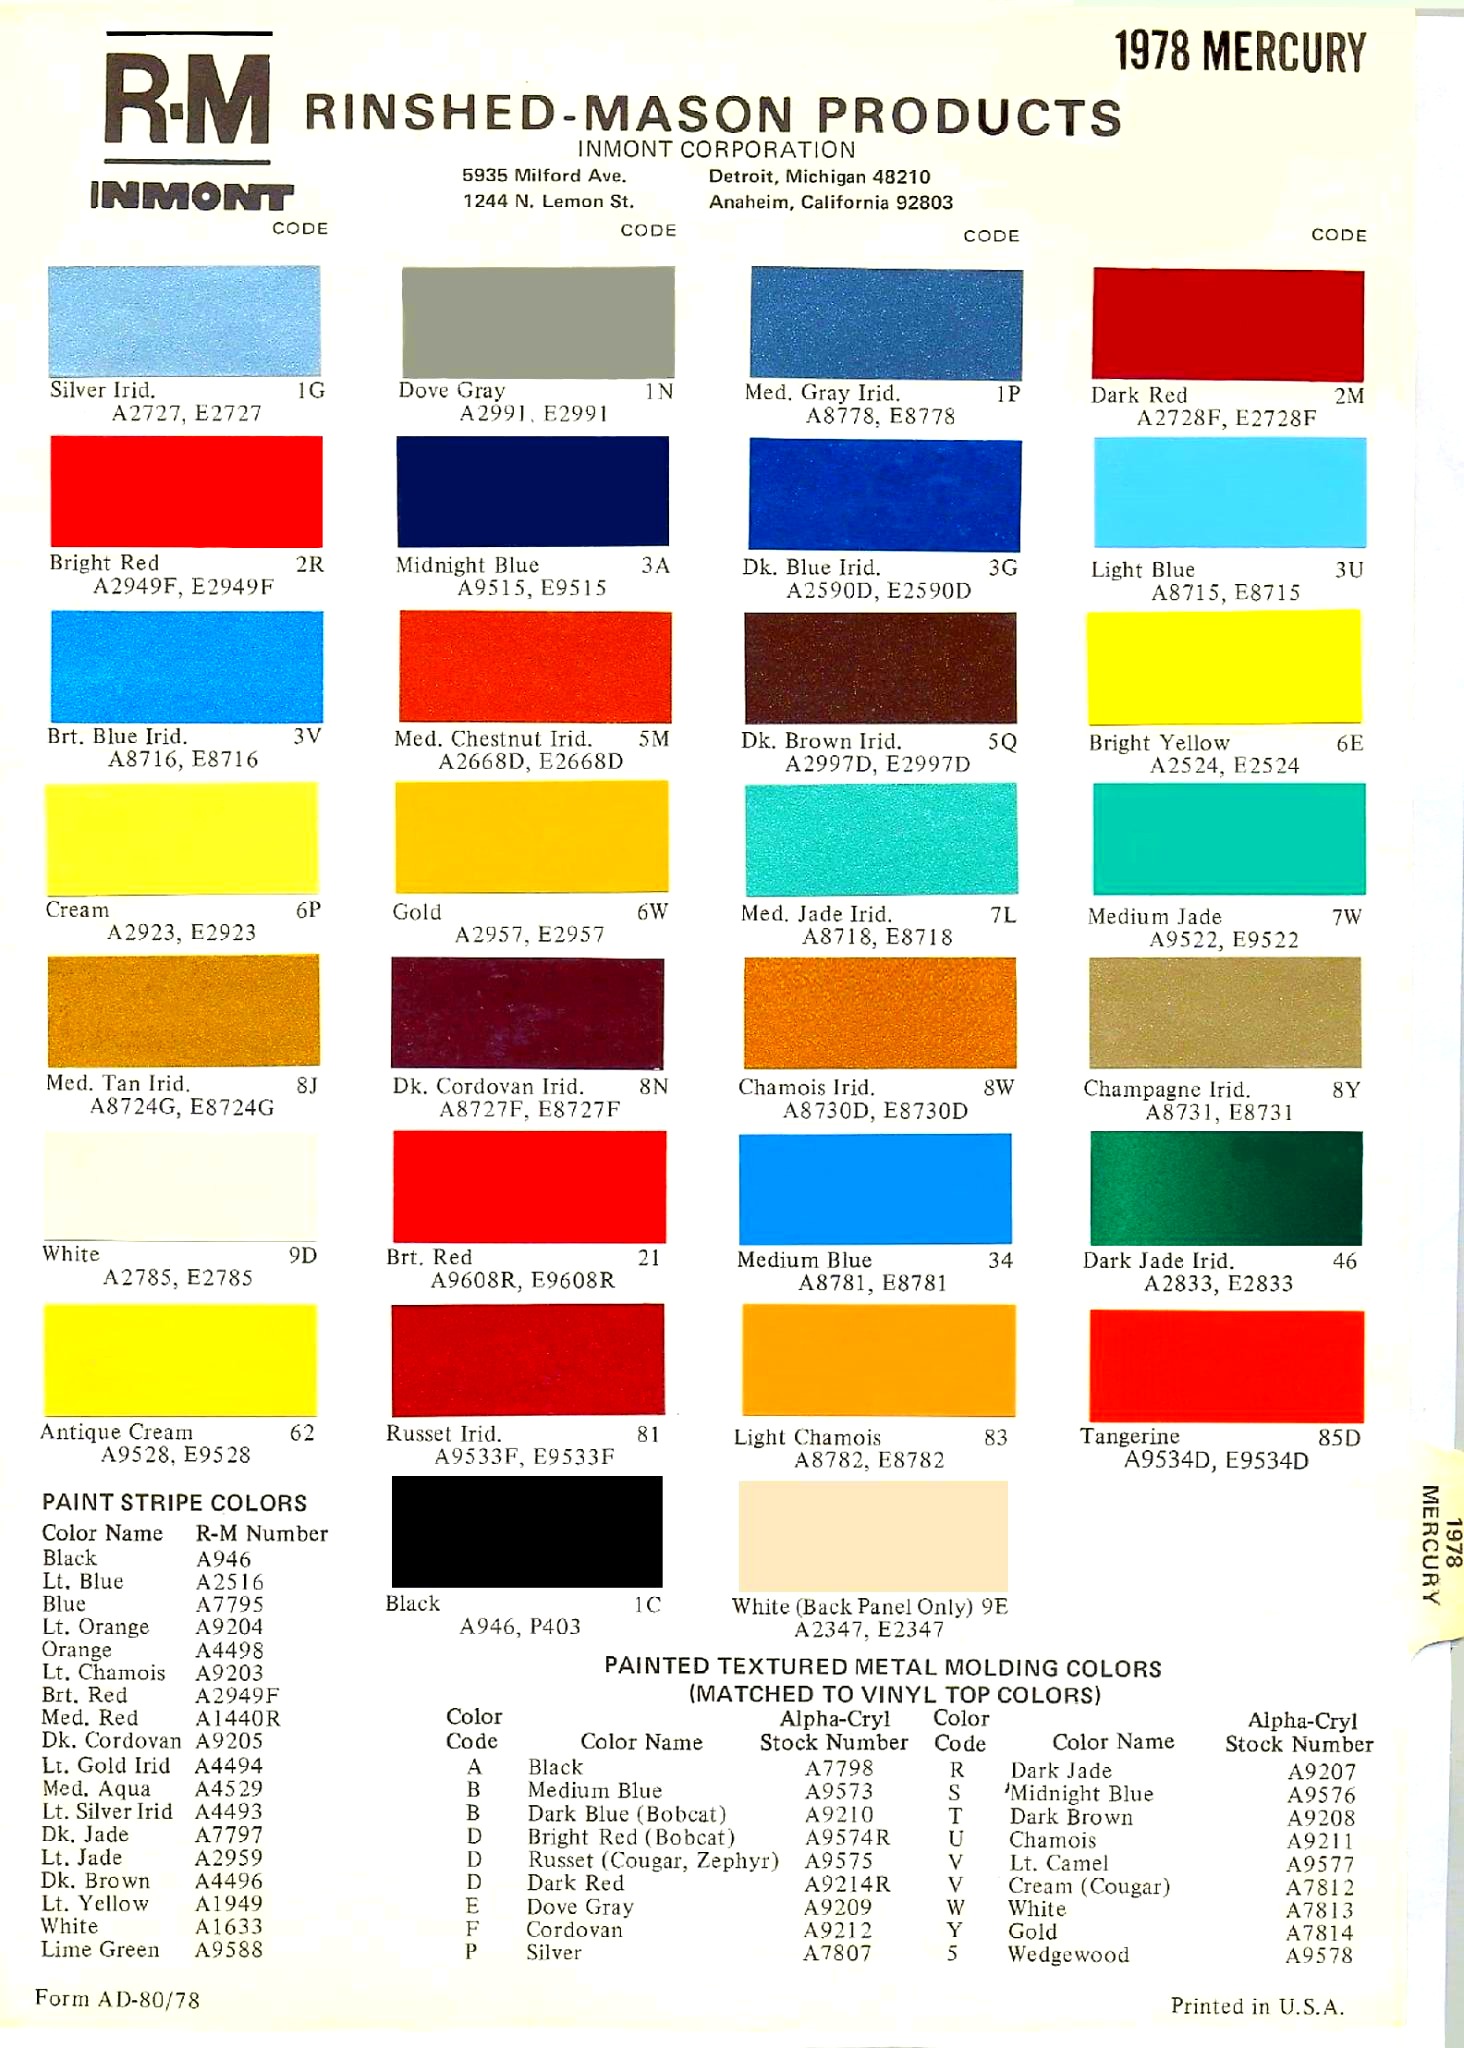 colors, codes and mixing stock numbers for 1978 mercury vehicle paint colors